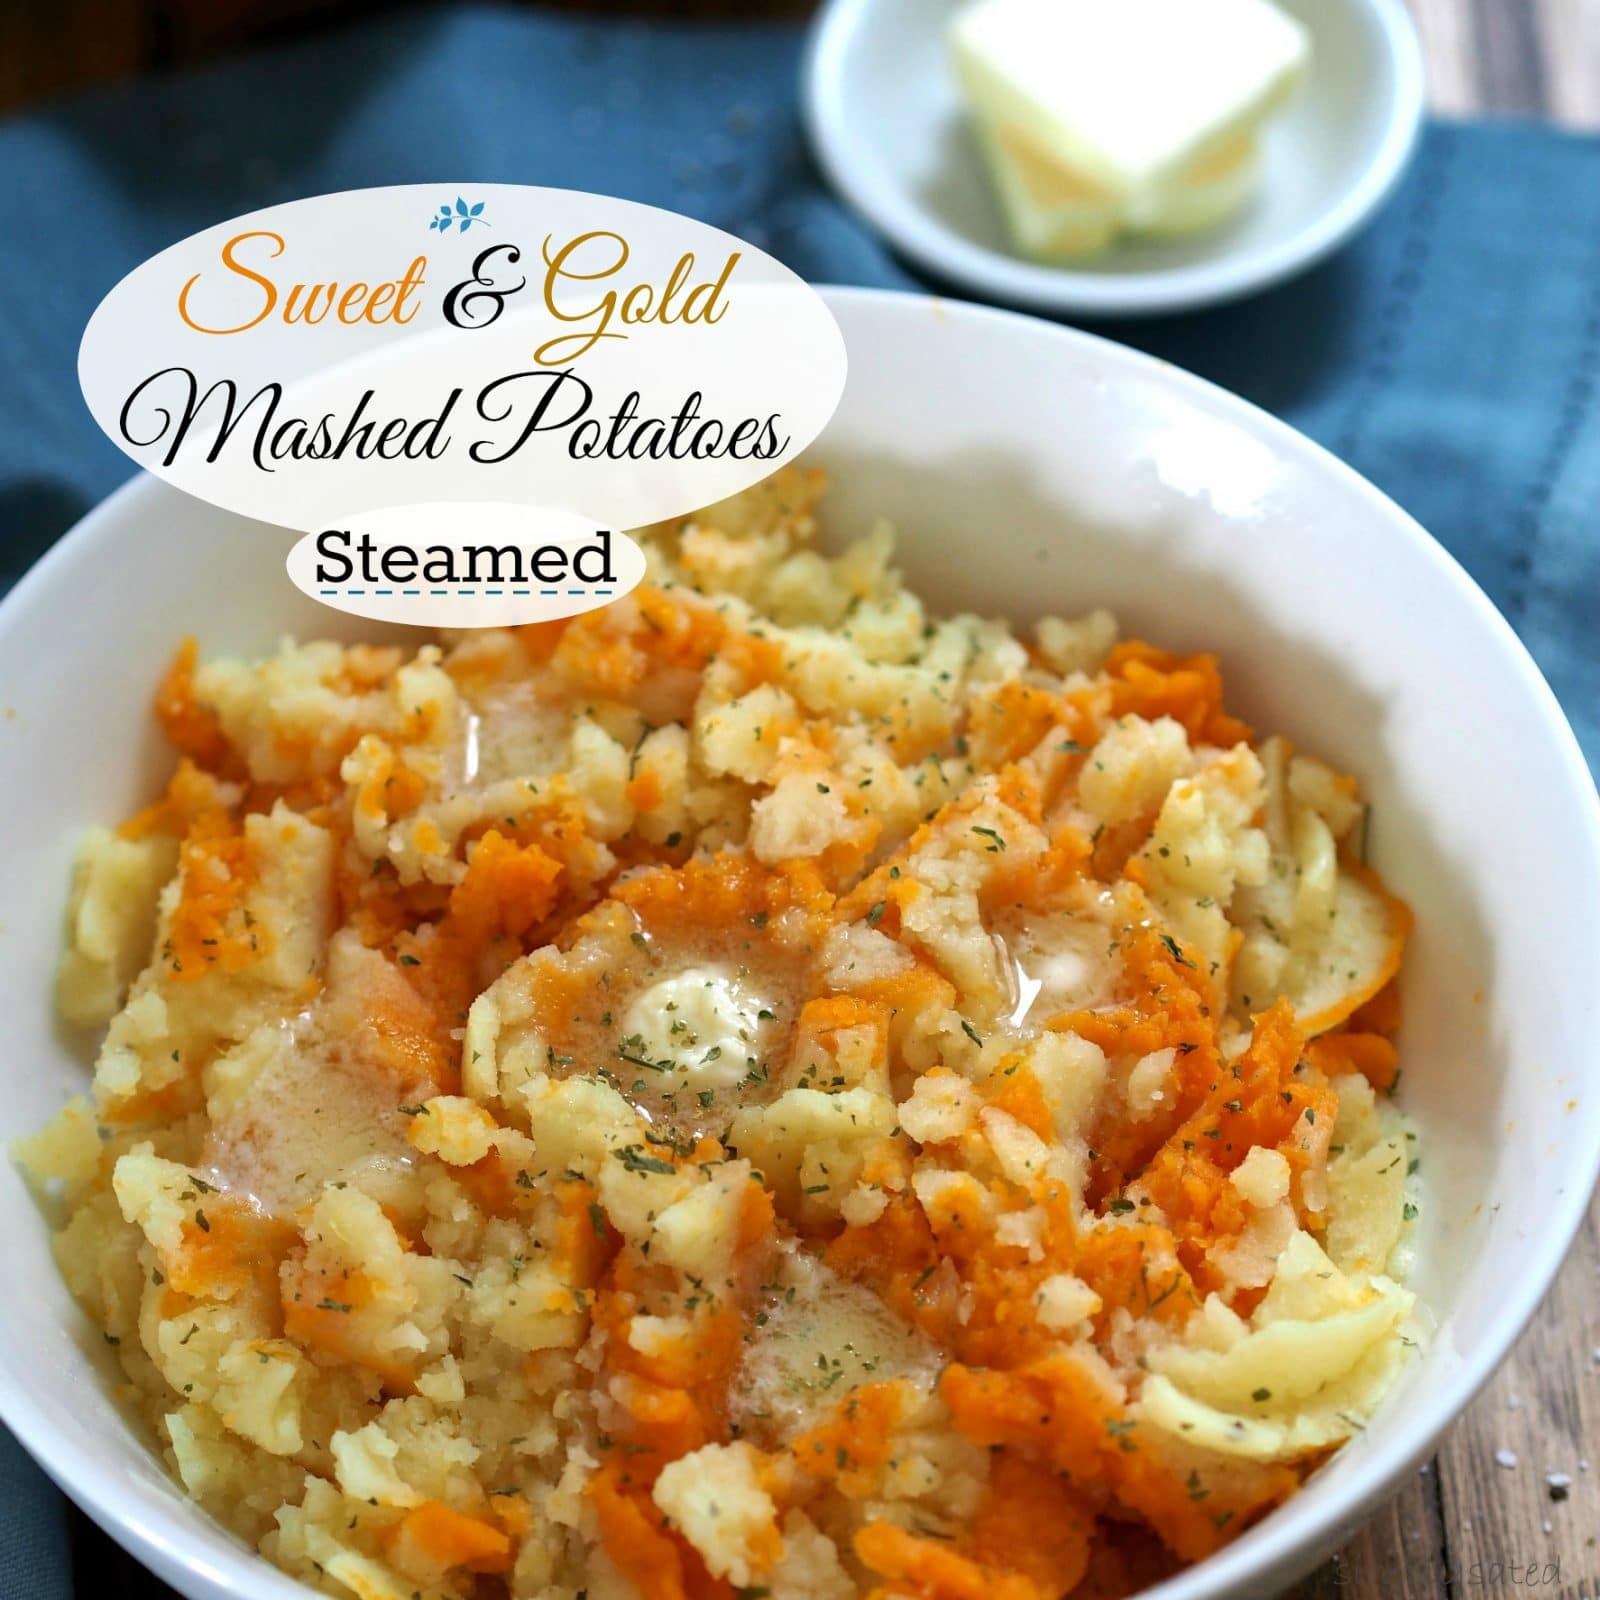 Sweet & Gold Mashed Potatoes. Sweet Potatoes & Yukon Golds are steamed then mixed with butter, salt & pepper - the best mashed potatoes - ever! Simply Sated